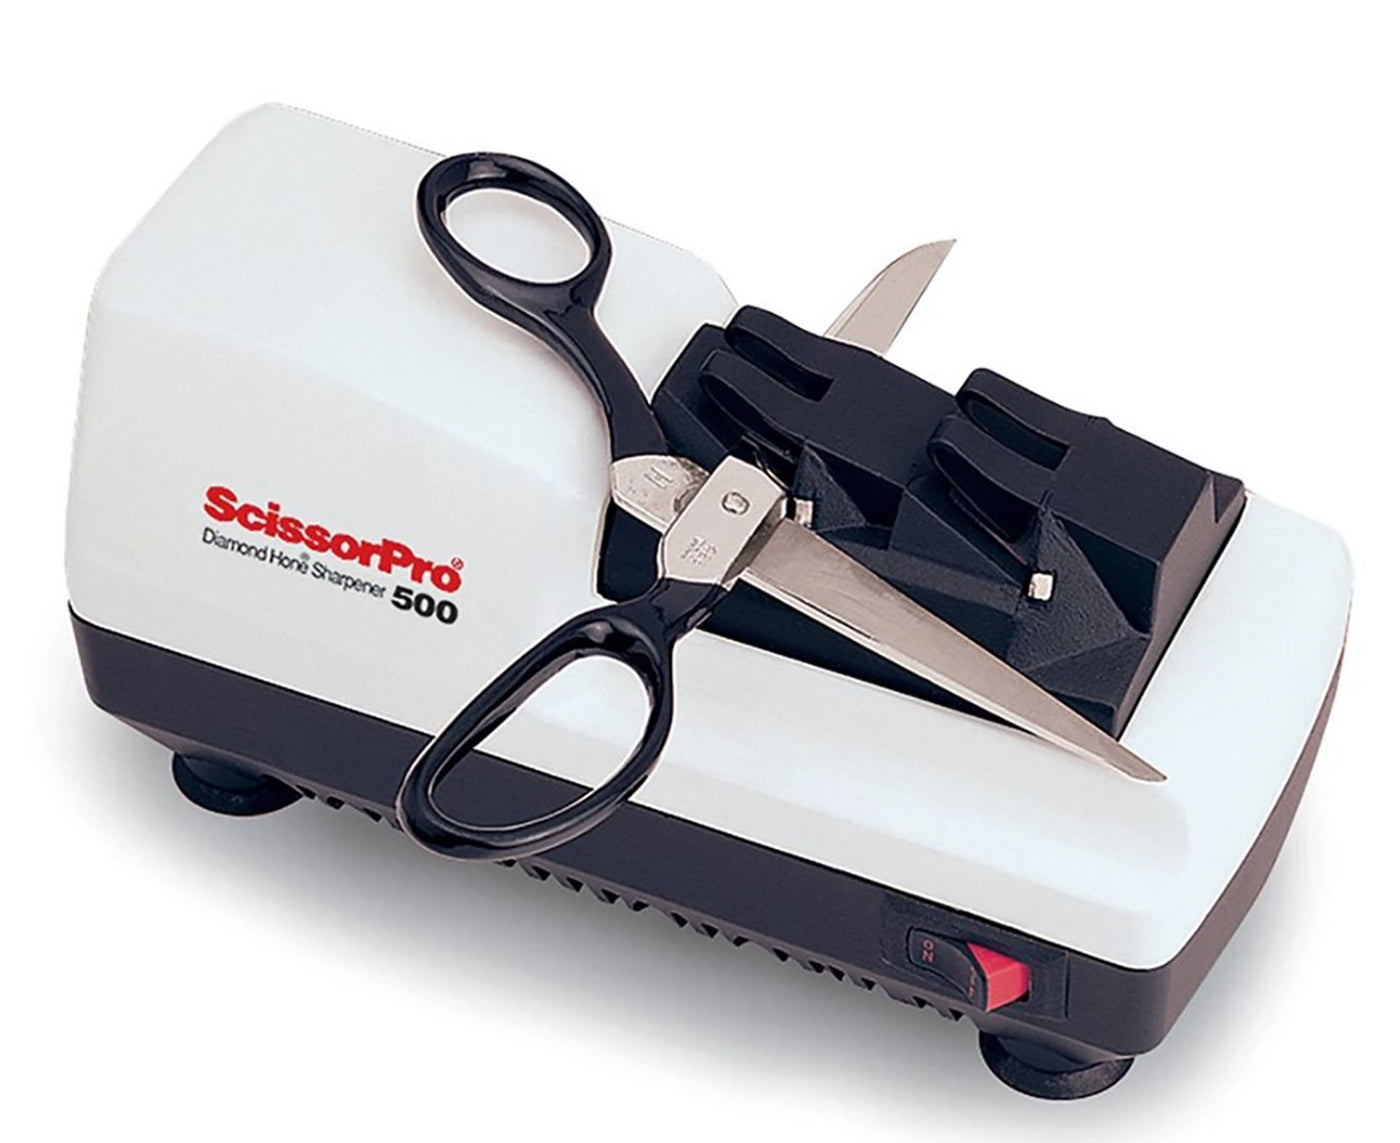 The ScissorPro® electric scissors sharpener uses 100% diamond abrasives and  built-in precision angle guides to help you quickly and easily apply  professional quality edges. It sharpens a wide variety of household scissors